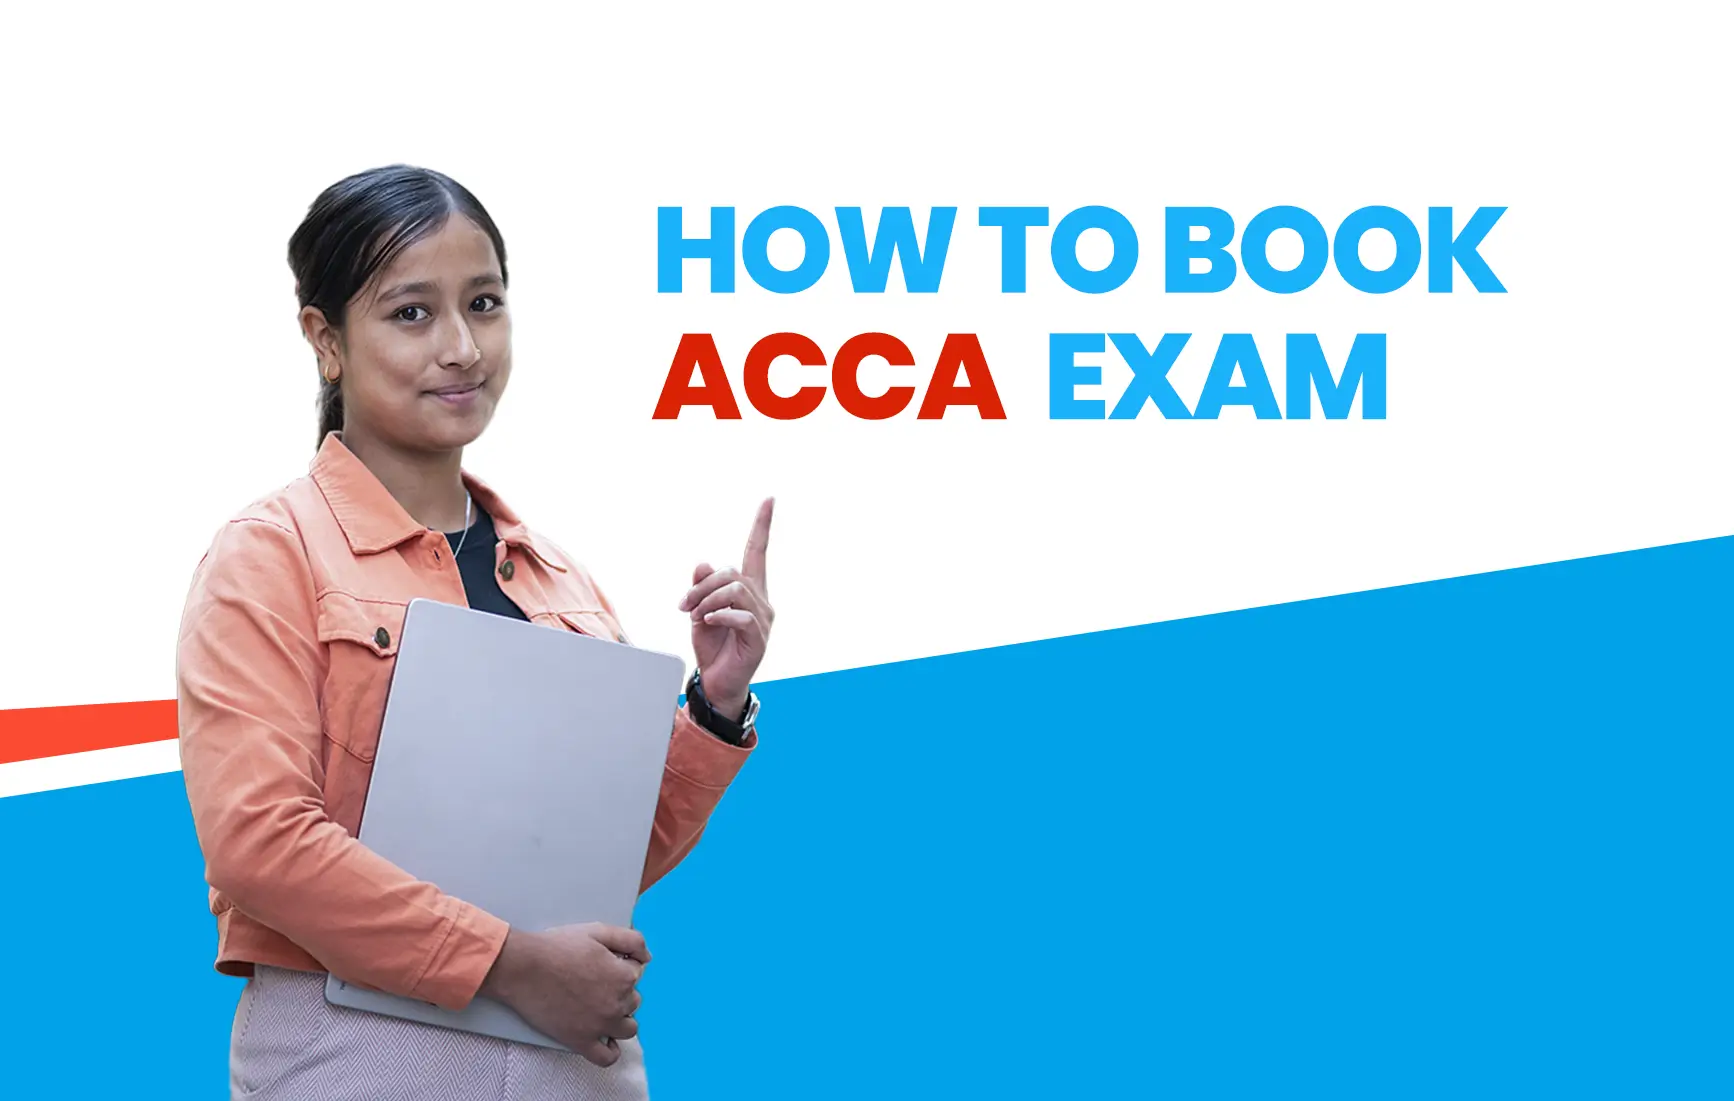 How to Book ACCA Exam